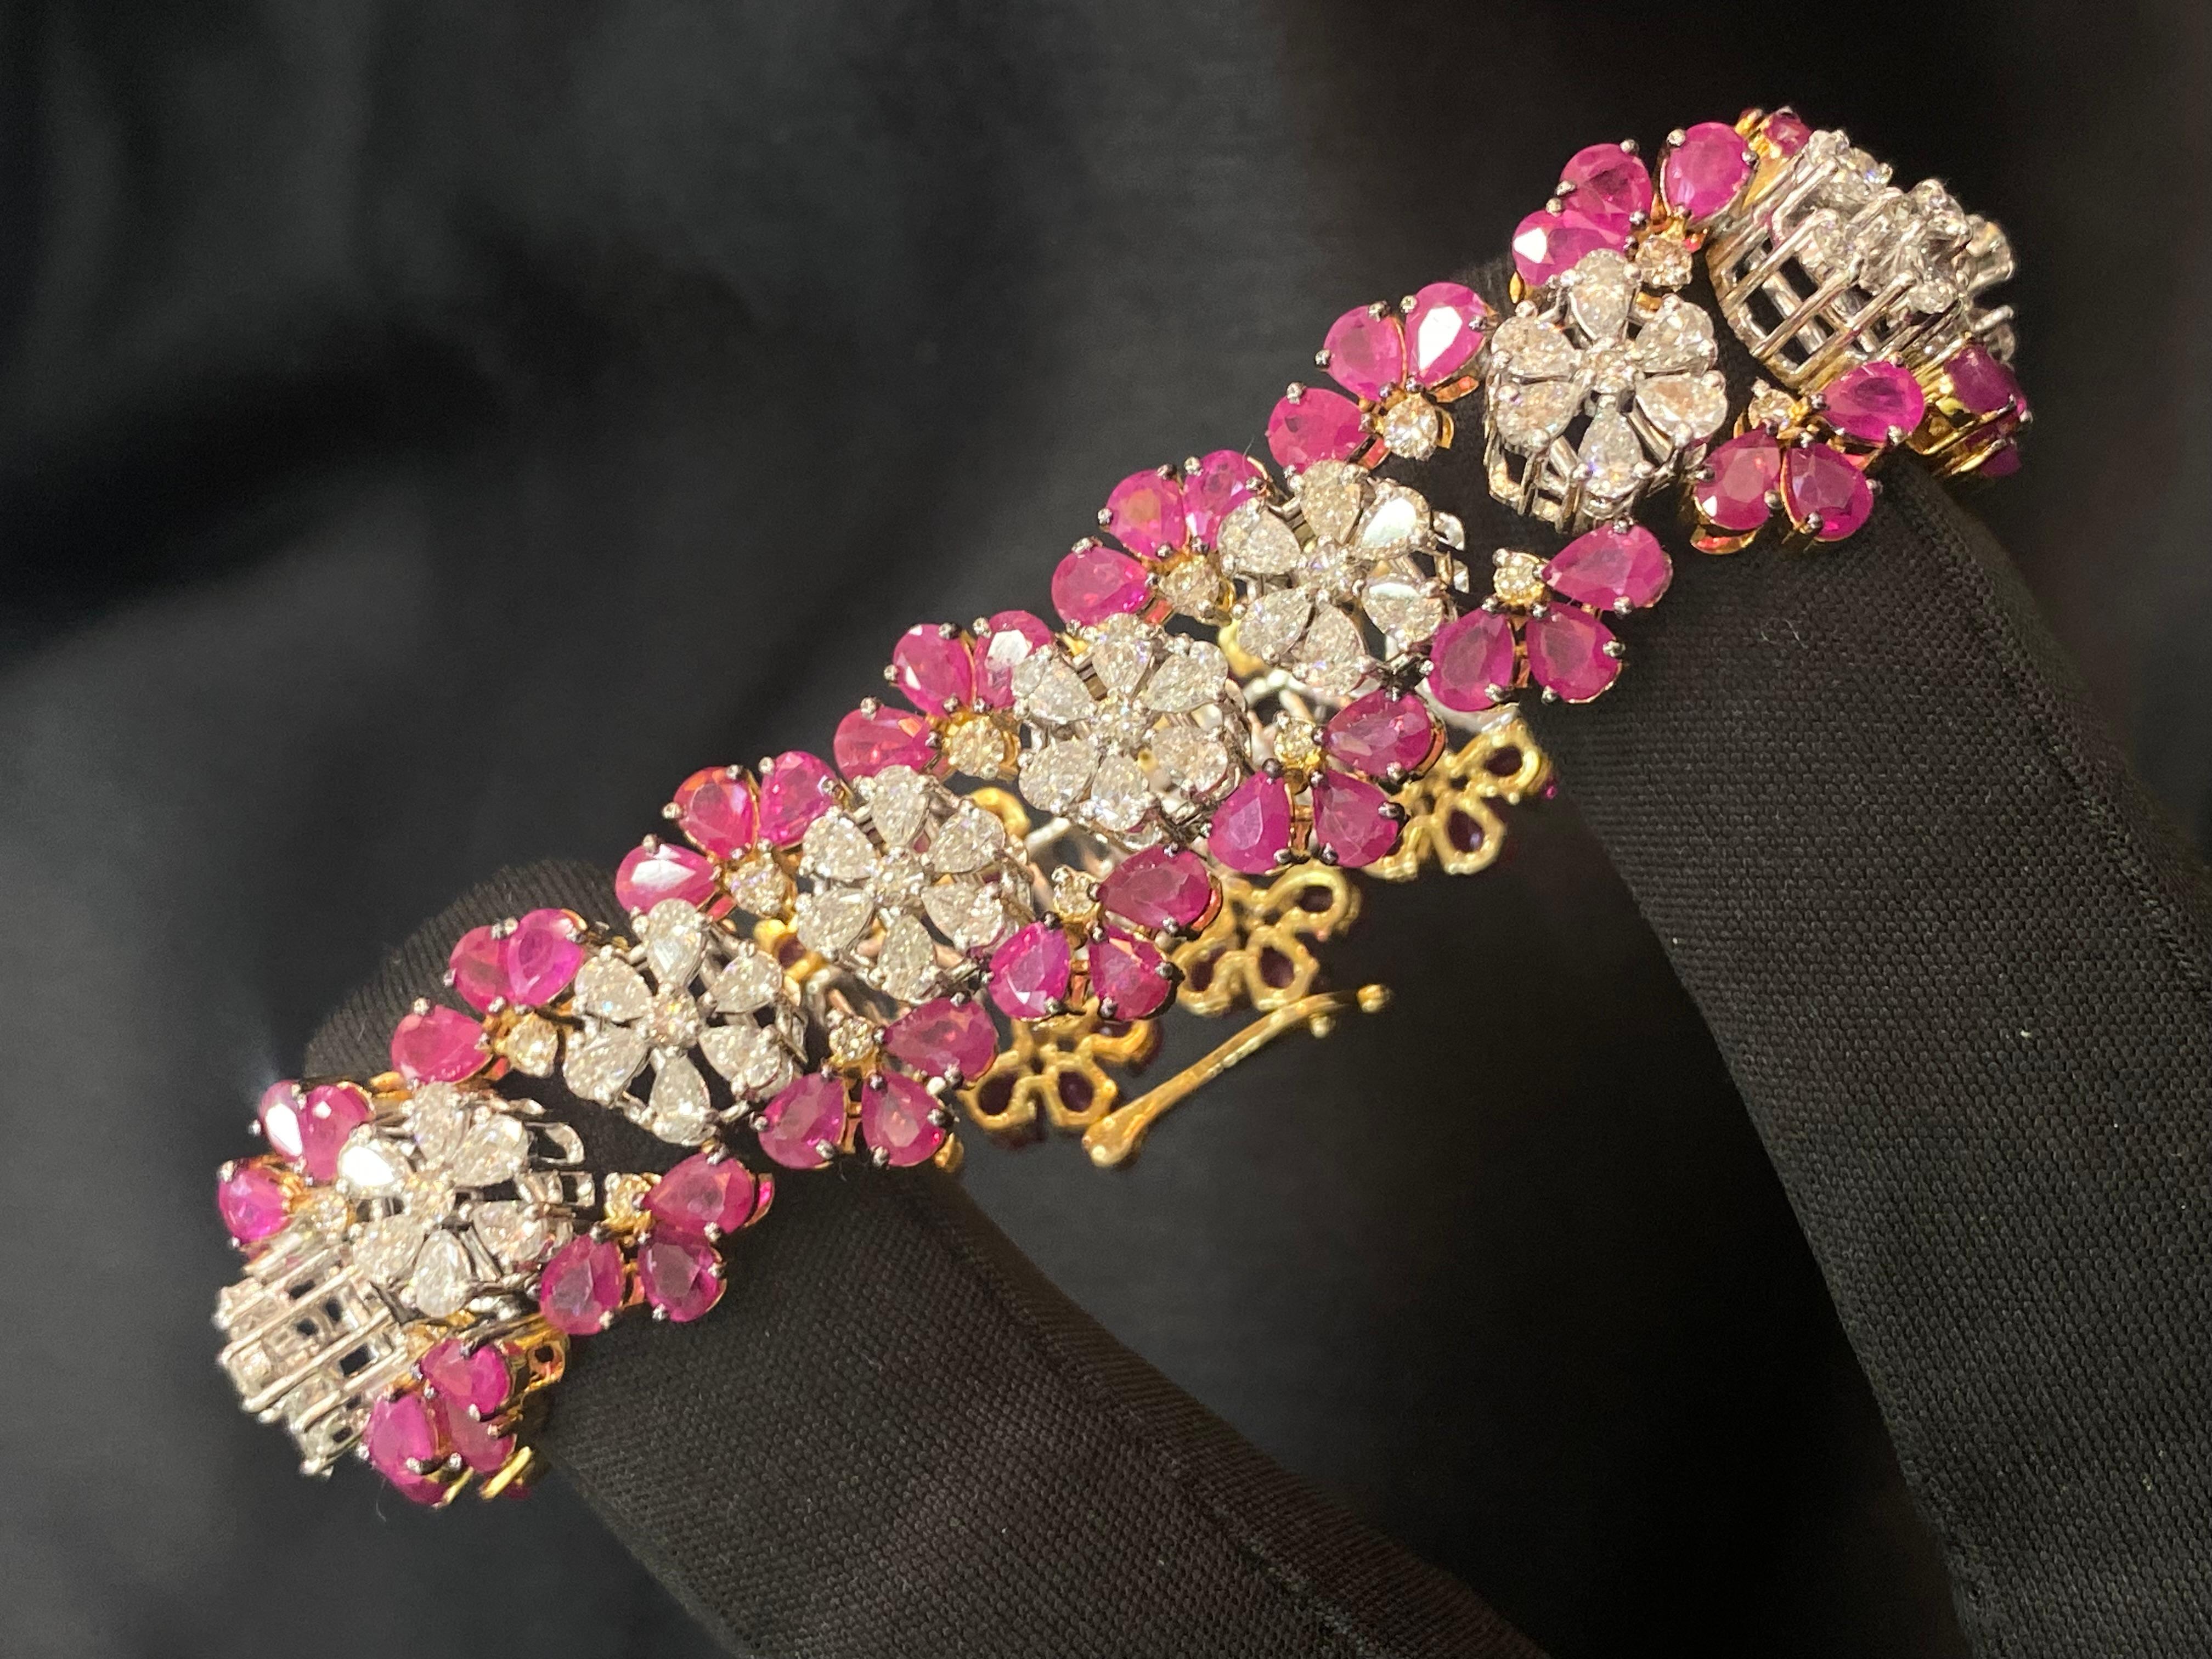 Behold this exquisite tennis bracelet, adorned with 7.42 carats of pear and round brilliant cut diamonds, accompanied by 23.65 carats of natural pear-shaped rubies, all delicately set in fine 14K gold. Perfect for any occasion, this stunning piece